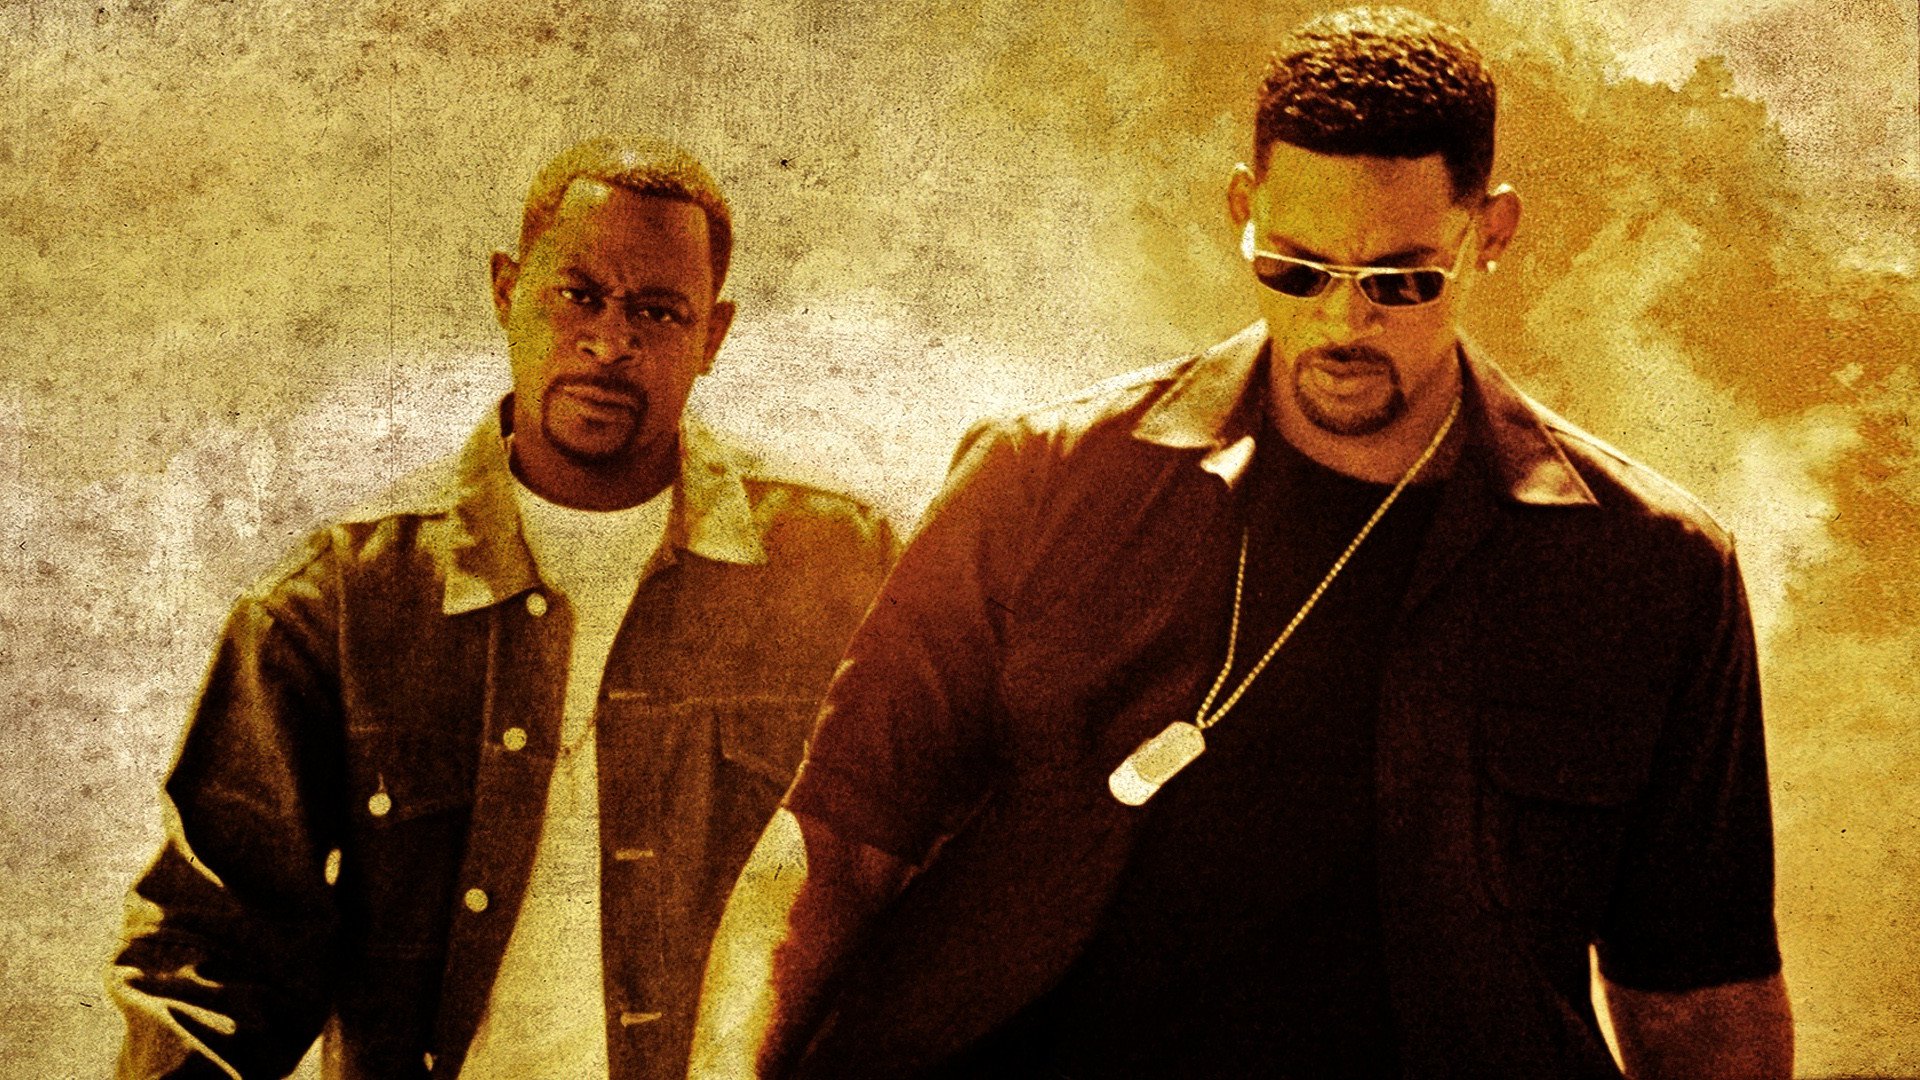 Martin Lawrence Will Smith 1920x1080